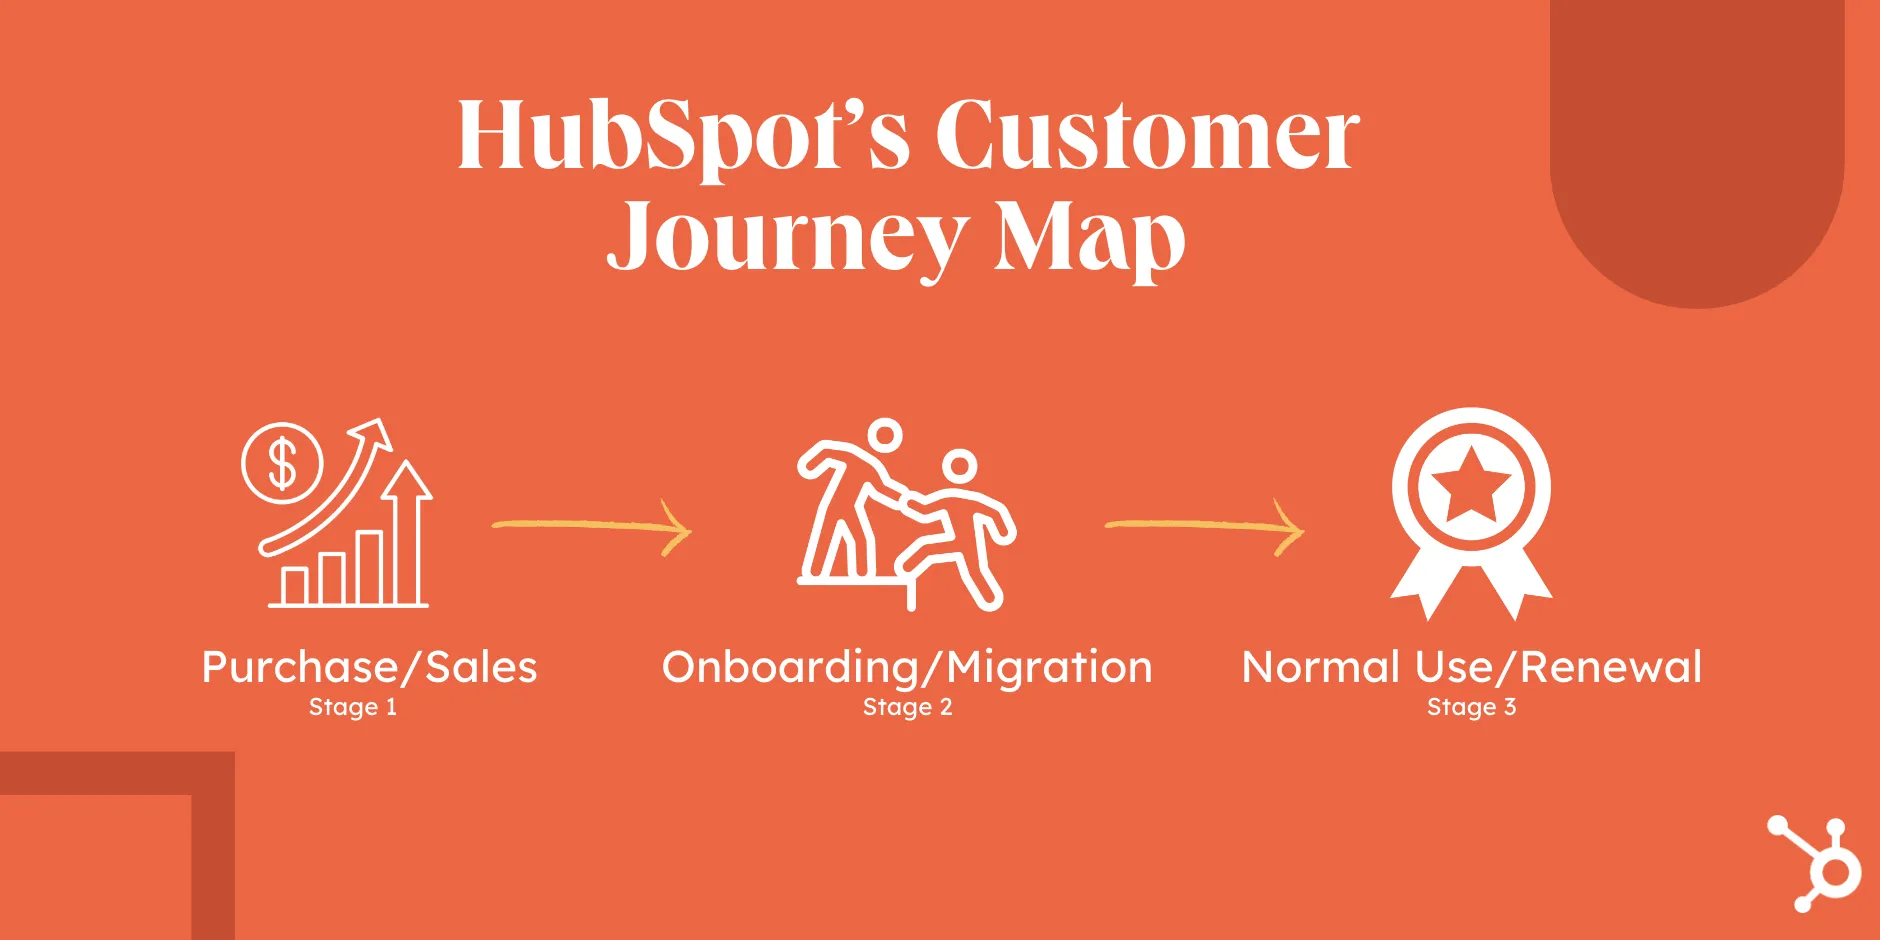 ></center></p><p>At each stage, HubSpot has a specific set of touchpoints to meet customers where they are — like using blog posts to teach customers about marketing and sales, then nurturing them slowly toward a paid subscription. Within later stages, there are several “moments” such as comparing tools, sales negotiations, technical setup, etc.</p><p>The stages may not be the same for you — in fact, your brand will likely develop a set of unique stages of the customer journey. But where do you start? Let’s discuss creating your customer journey map.</p><p>A customer journey map is a visual representation of the customer's experience with a company. It also provides insight into the needs of potential customers at every stage of this journey and the factors that directly or indirectly motivate or inhibit their progress.</p><p>The business can then use this information to improve the customer experience, increase conversions, and boost customer retention.</p><p>The customer journey map is not to be confused with a UX journey map. But, for clarity, let’s distinguish these two below.</p><h2>What is UX journey mapping?</h2><p>A UX journey map represents how a customer experiences their journey toward achieving a specific goal or completing a particular action.</p><p>For example, the term “UX journey mapping” can be used interchangeably with the term “customer journey mapping” if the goal being tracked is the user’s journey toward purchasing a product or service.</p><p>However, UX journey mapping can also be used to map the journey (i.e., actions taken) towards other goals, such as using a specific product feature.</p><p><center><a href=